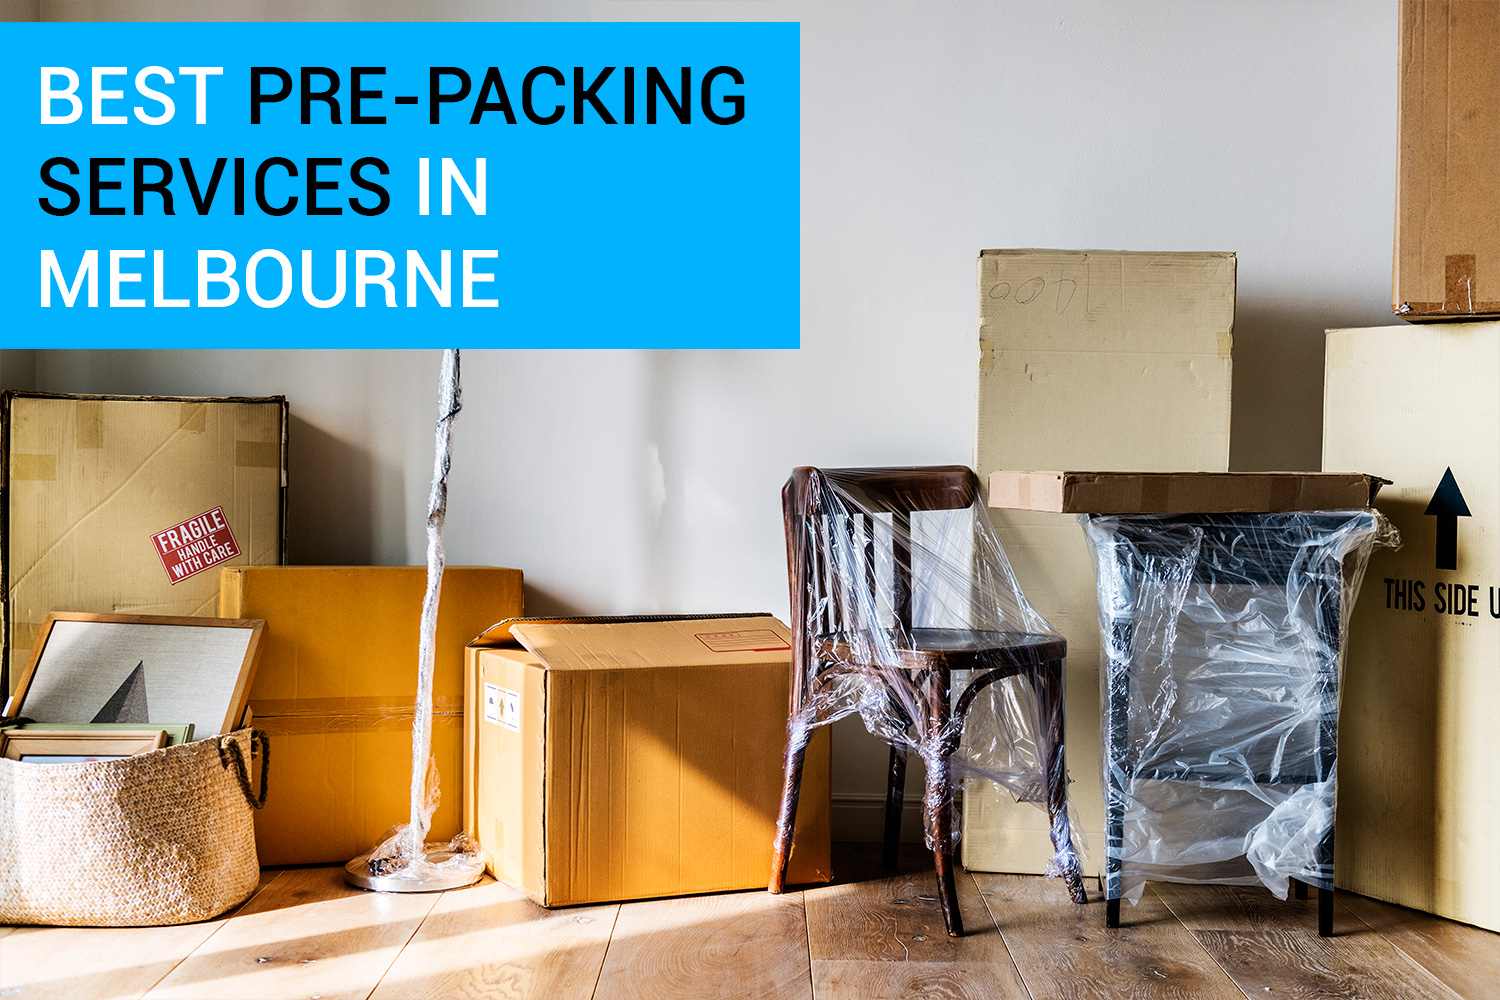 Best Pre-Packing Services in Melbourne